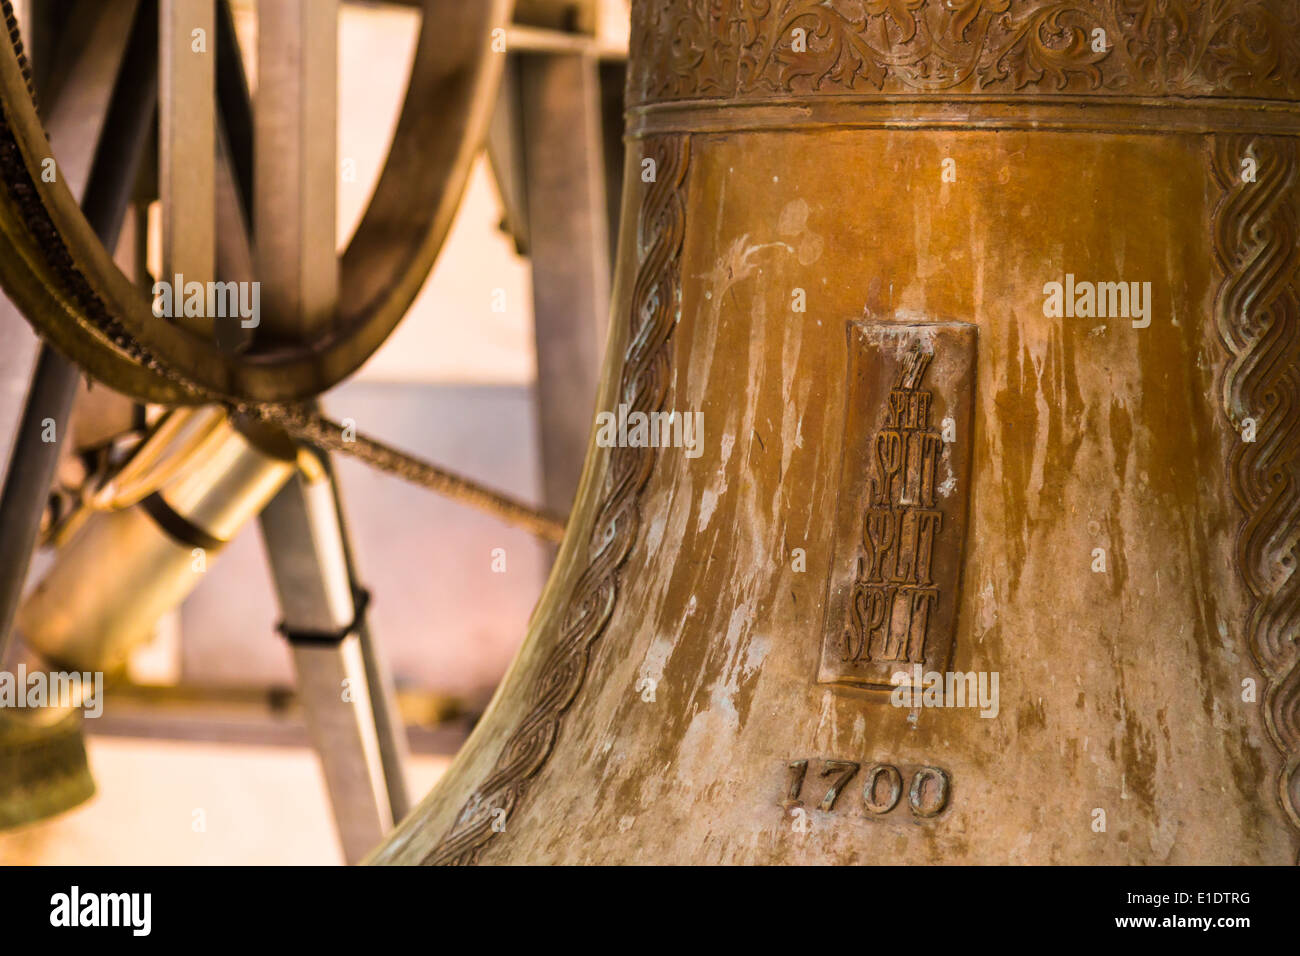 Bells located in the cathedral of St Domnius in Split Croatia showing inscription in detail Stock Photo